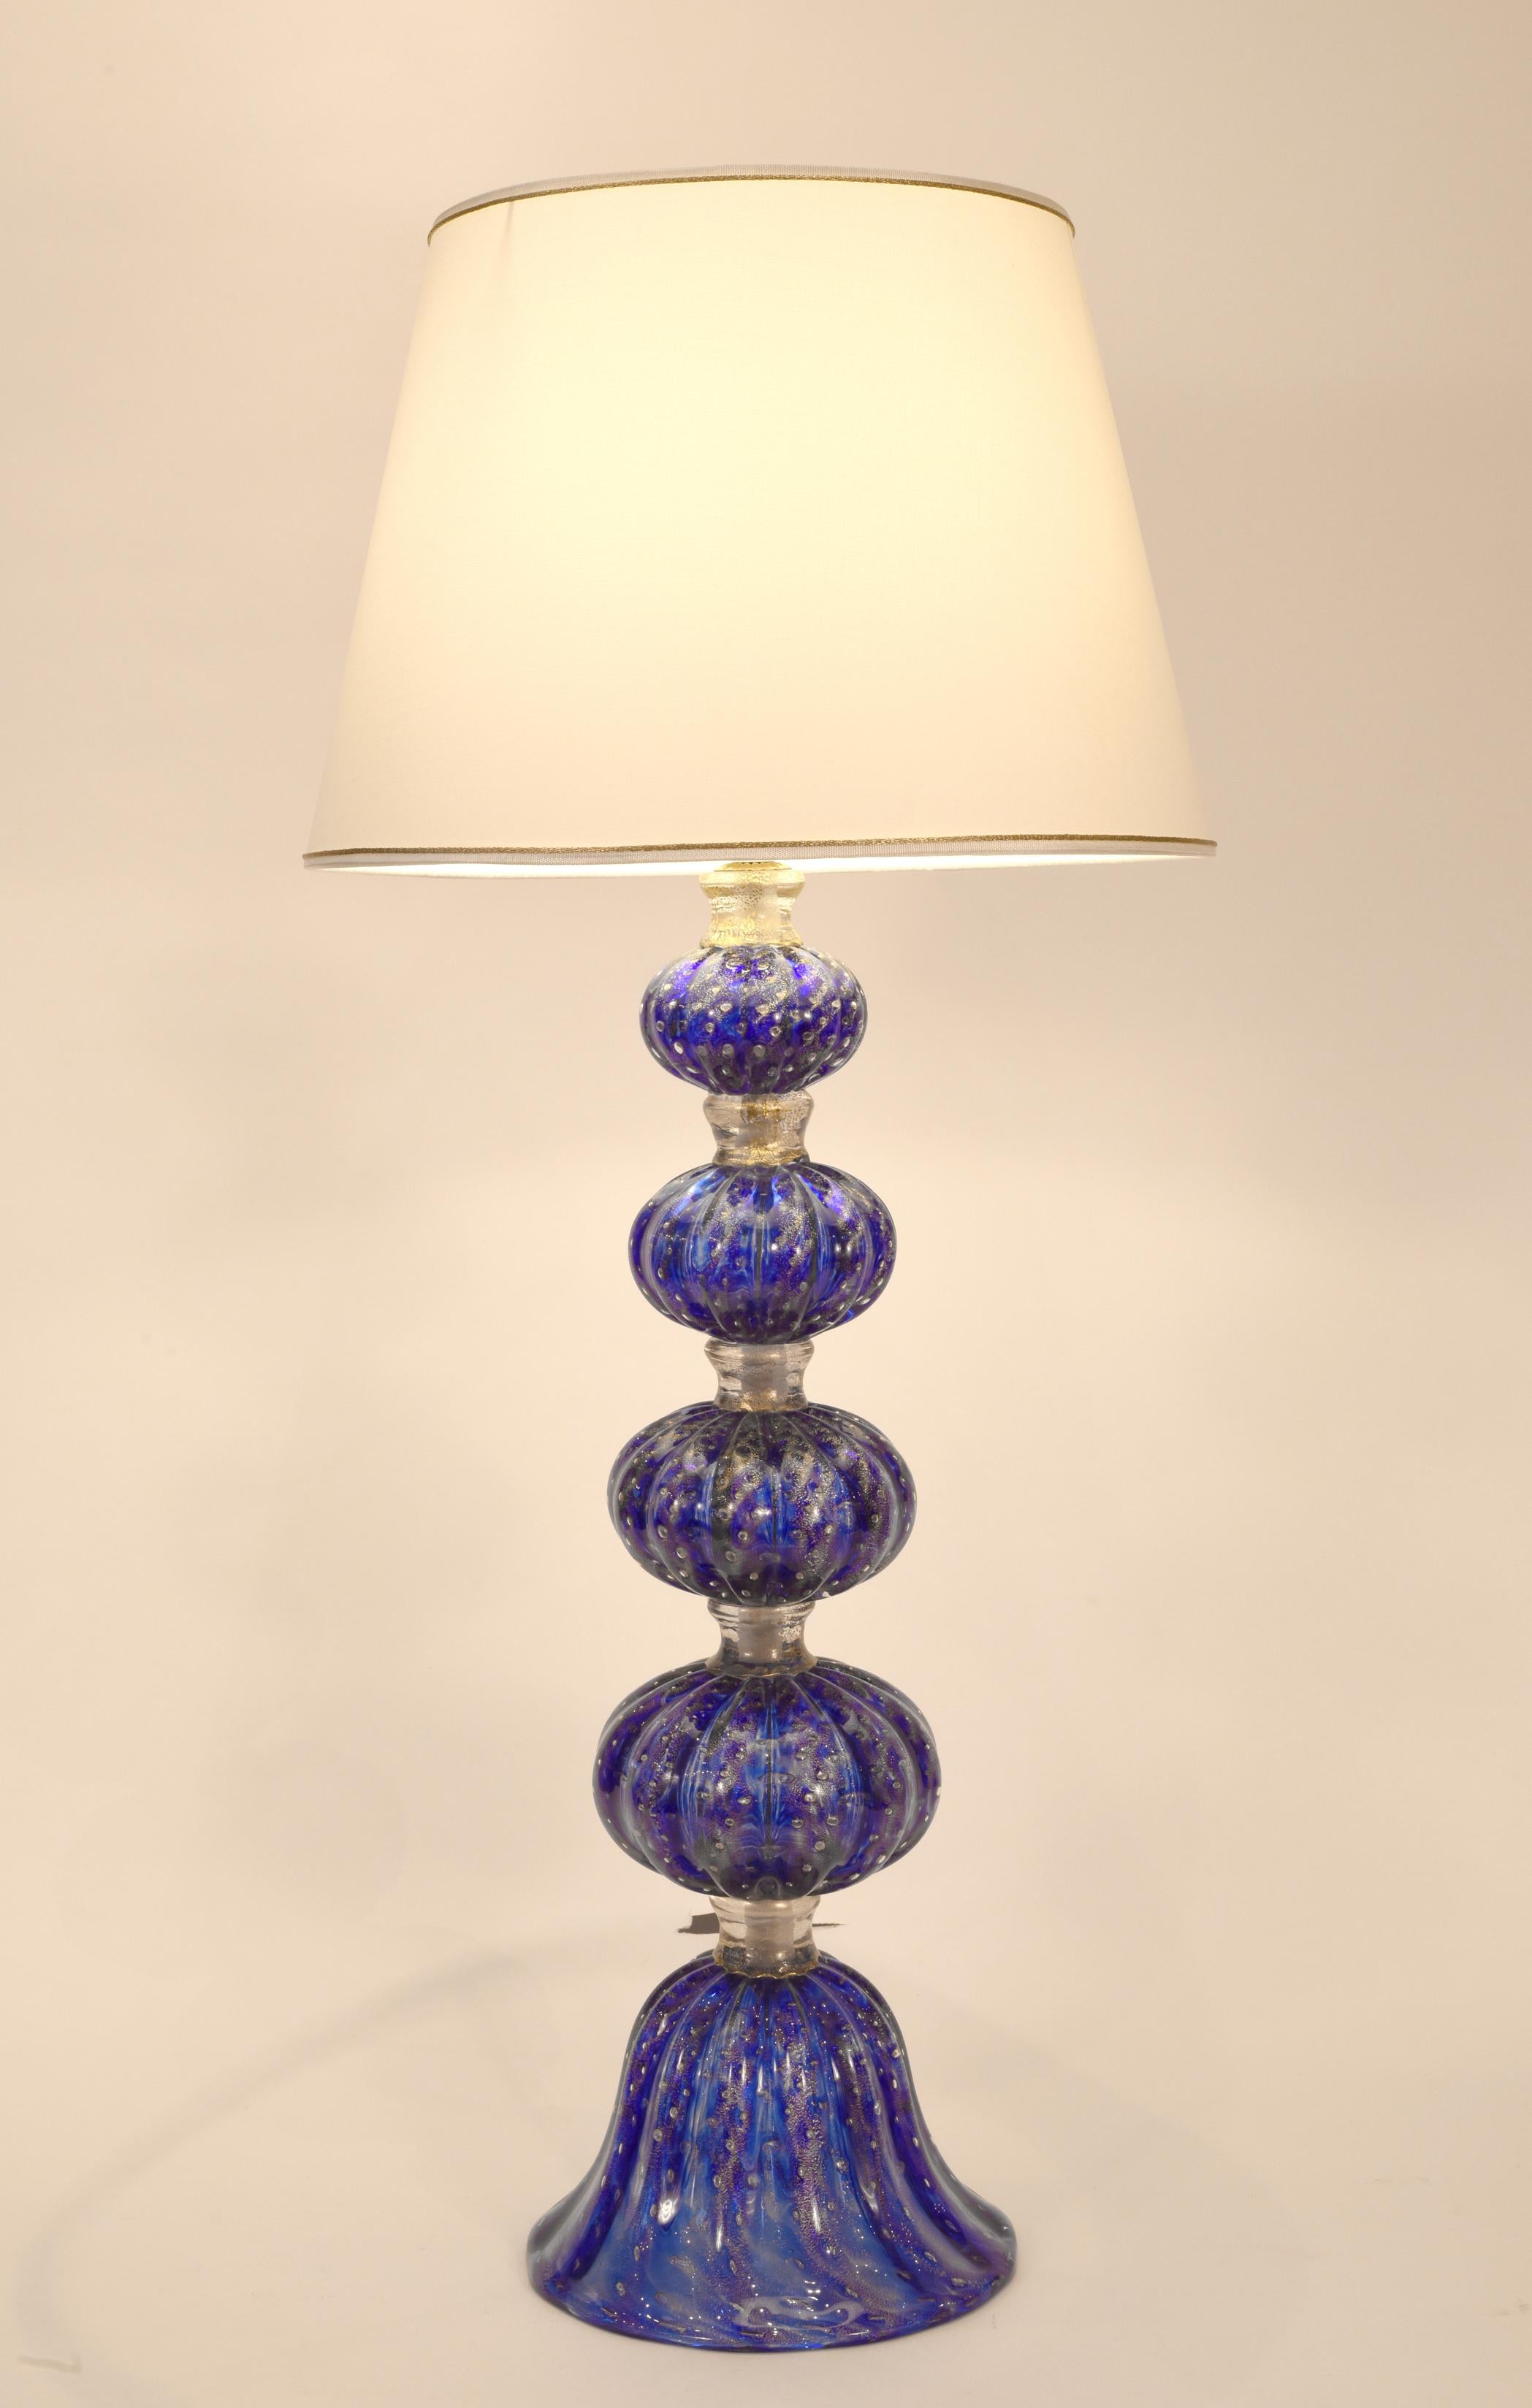 Exquisite pair cobalt blue with gold flecks Murano glass table / task lamps. Each lamp is in excellent working condition. Maker's mark undersigned on each one. Rewired for US use. Each lamps measure about 27 inches high from base to socket light